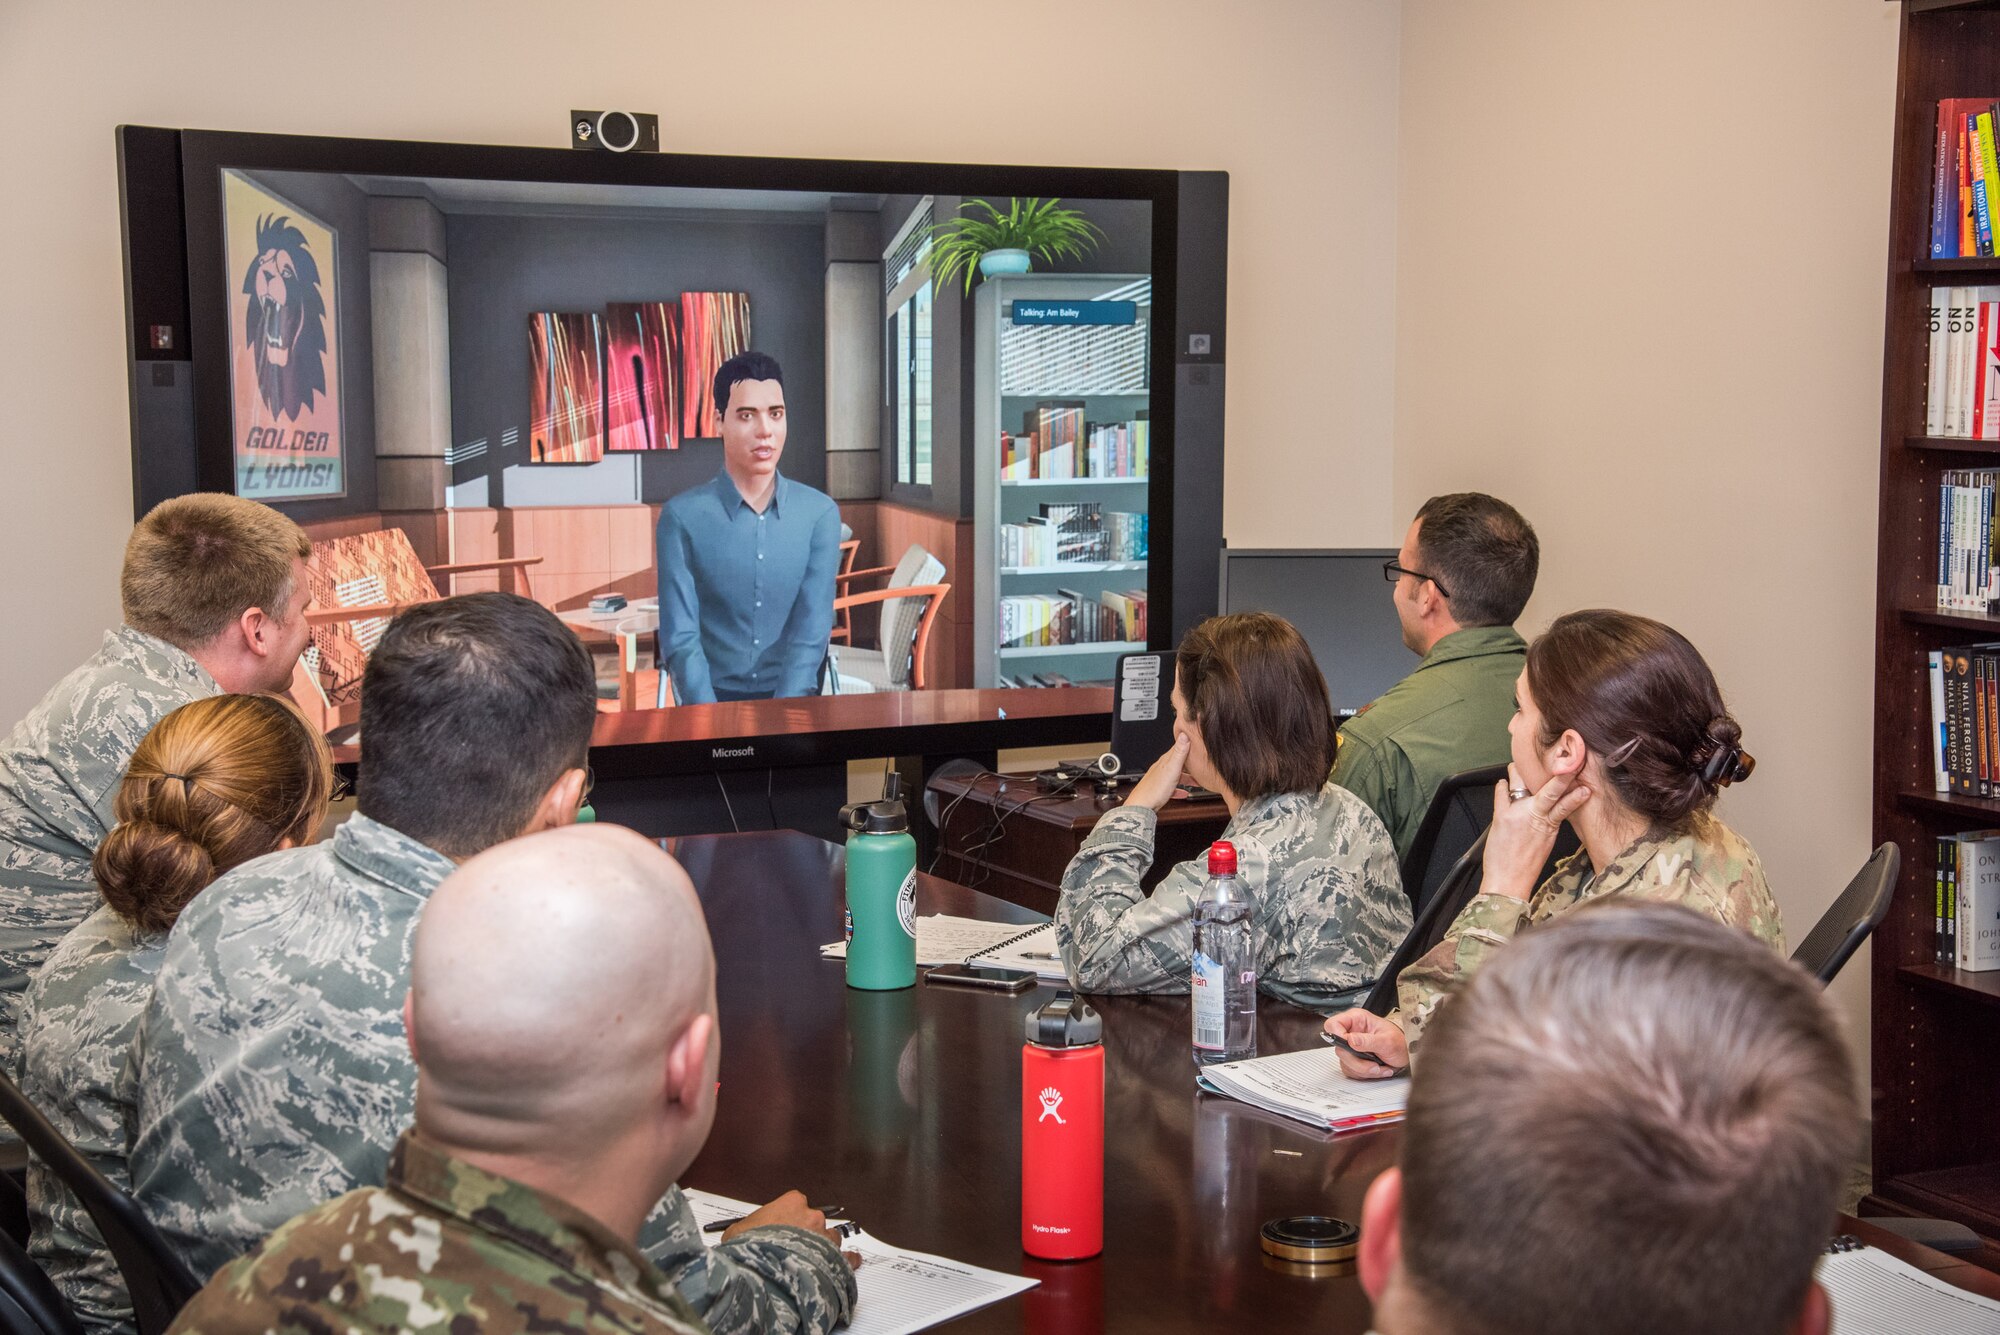 In one of the capstone events for the Leader Development Course for Squadron Command students are placed into a ‘virtual’ scenario-based, experiential exercise. Students use the knowledge gained during the eight-day course to effectively communicate with different personality types in real-world derived situations. The capstone event depicted in the image was held Nov. 8, 2018, at Air University, Maxwell Air Force Base, Alabama. (U.S. Air Force photo by William Birchfield)